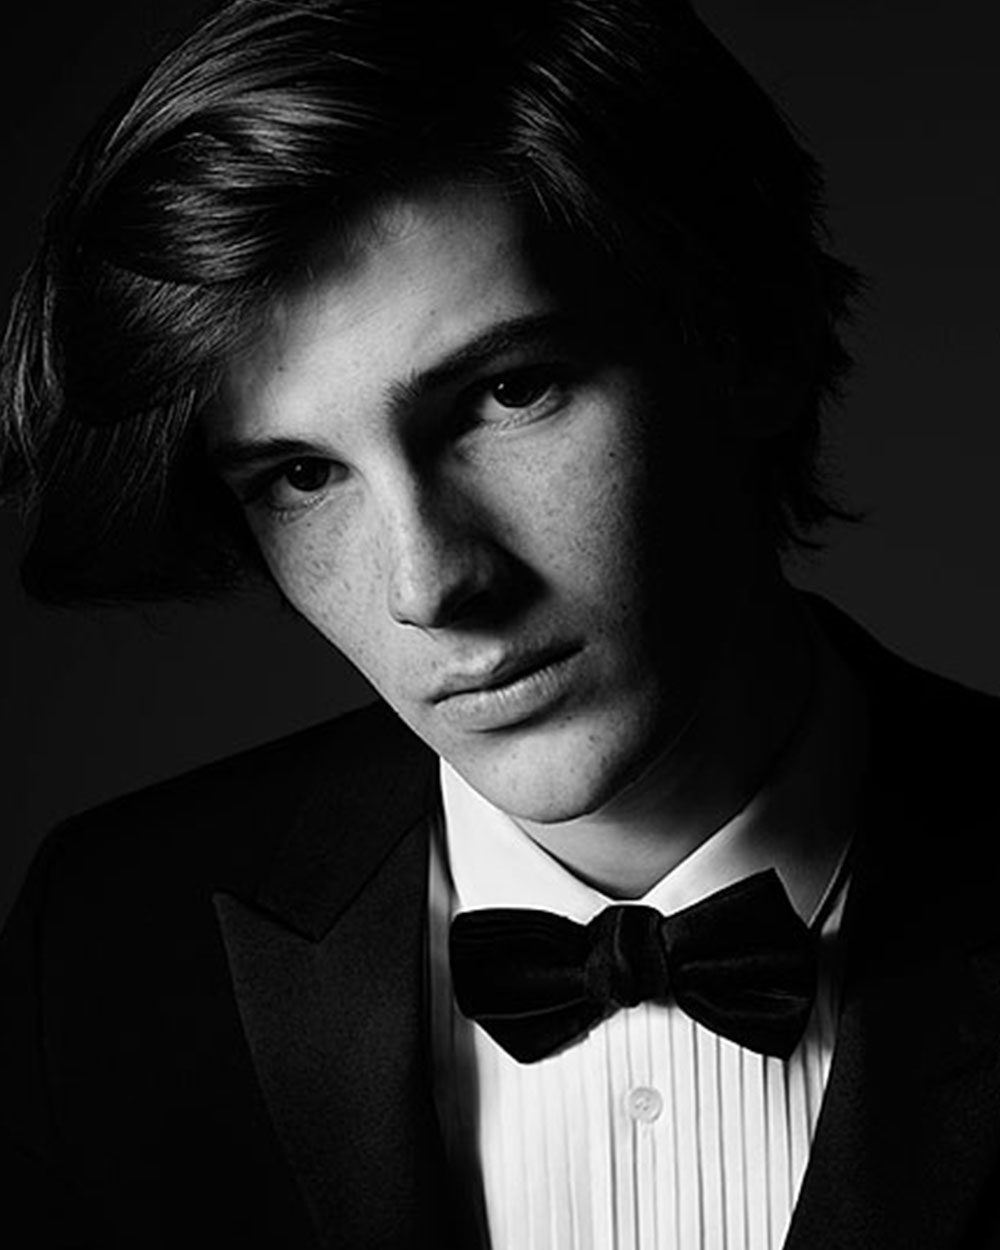 Dylan Brosnan is one of the stars of YSL’s The Permanent Collection campaign. Photo / Getty Images